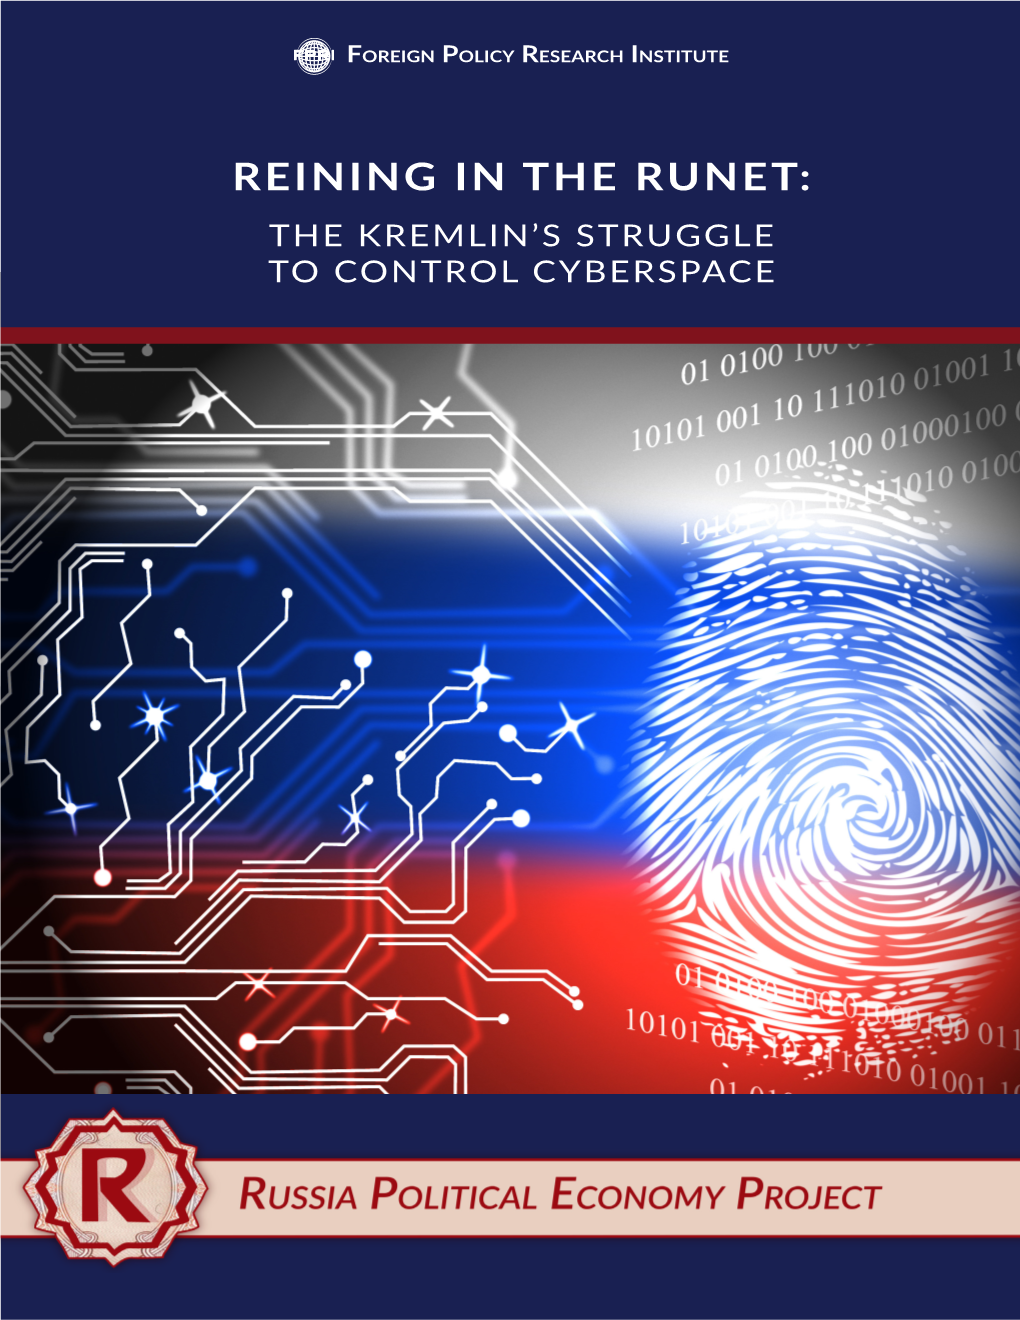 Reining in the Runet: the Kremlin’S Struggle to Control Cyberspace